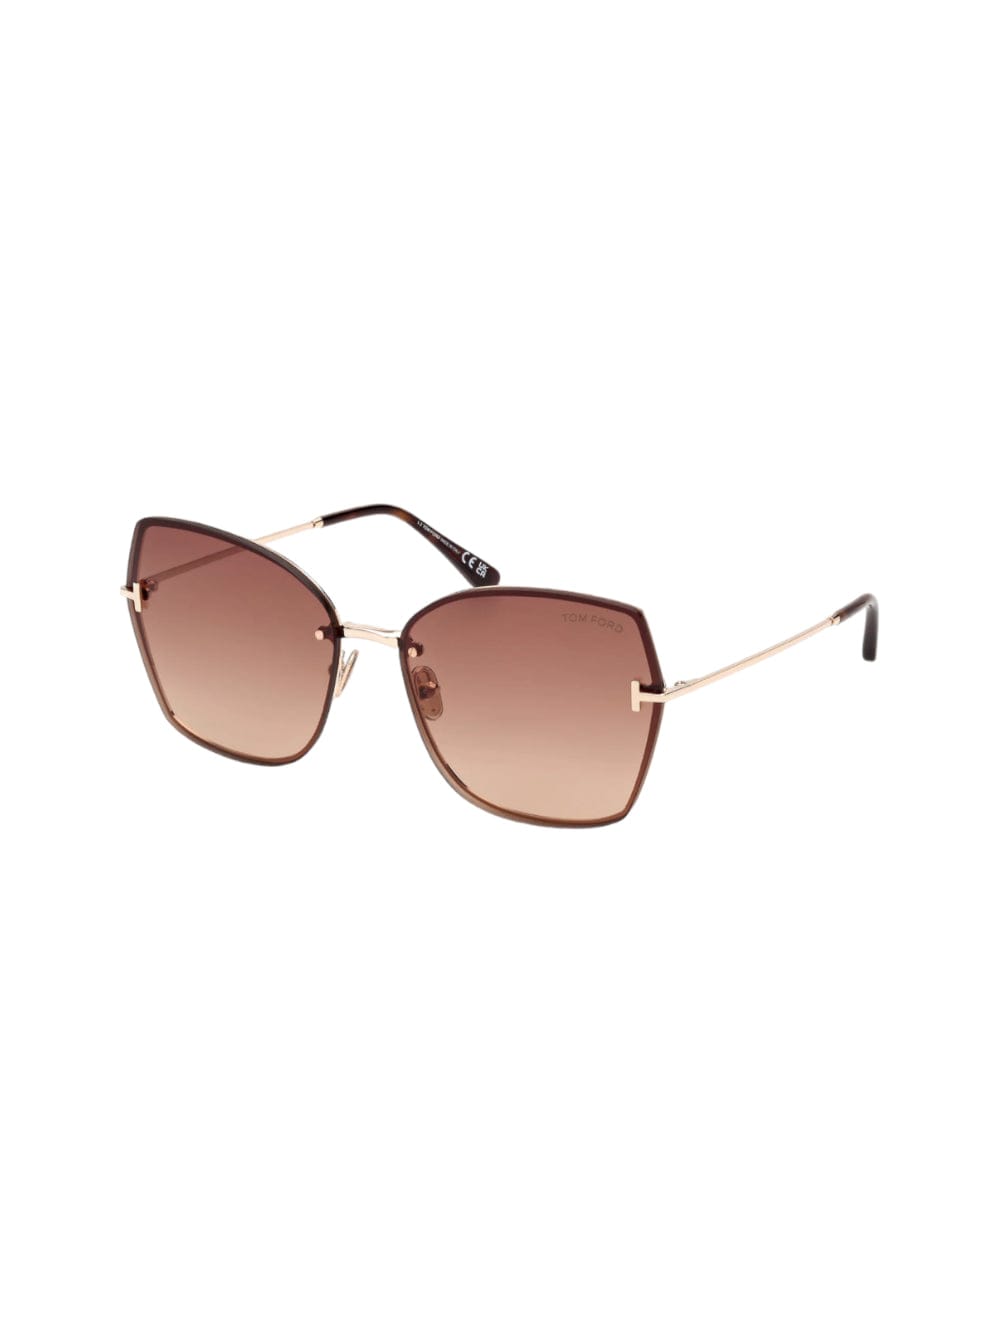 Tom Ford Nickie - Ft 1107 /s Sunglasses In Brown